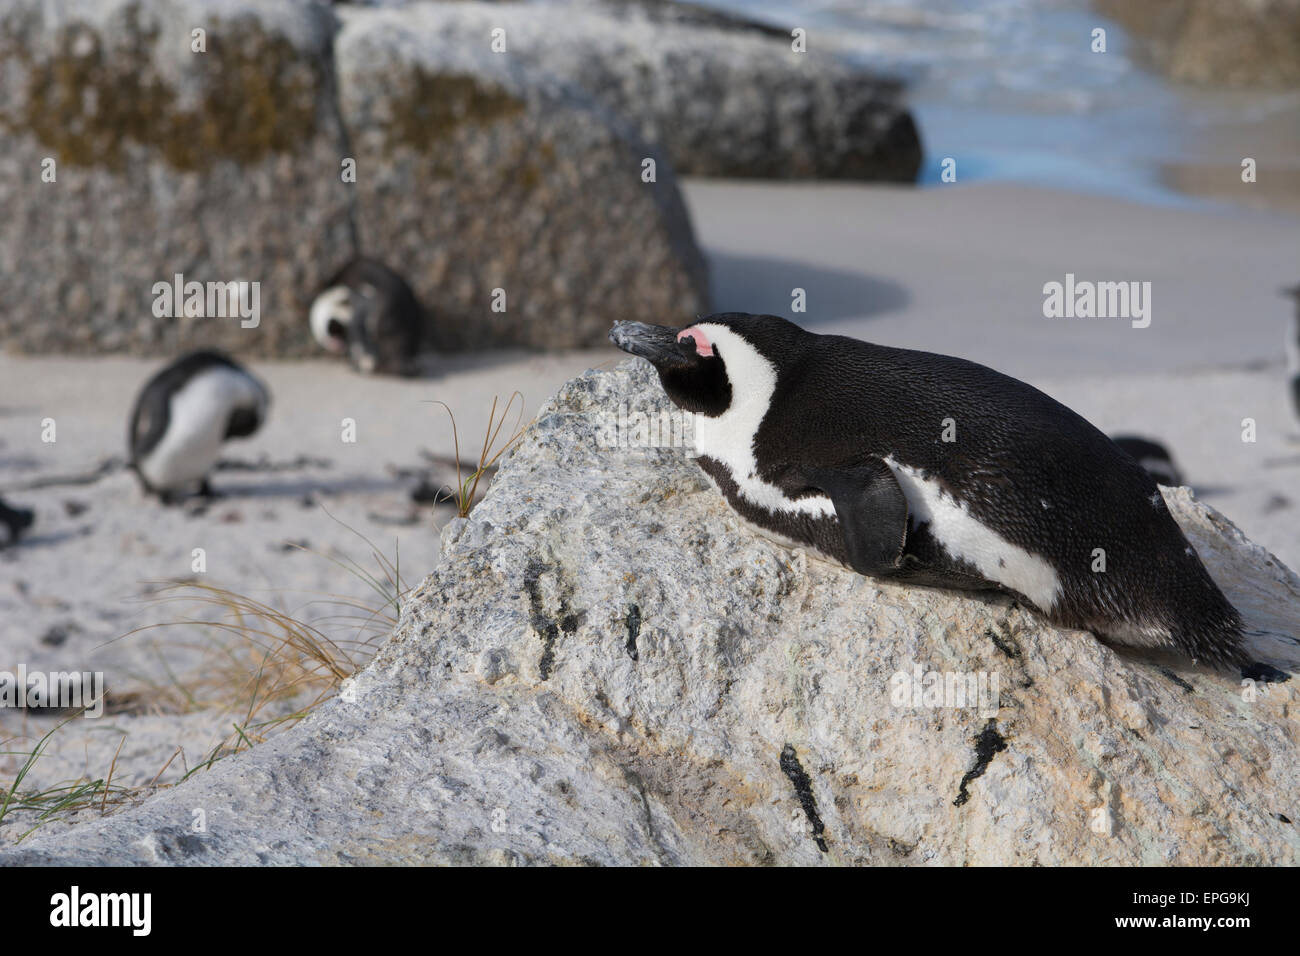 South Africa, Cape Town, Simon's Town, Table Mountain National Park, Boulders Beach. Colony of endangered African Penguins. Stock Photo